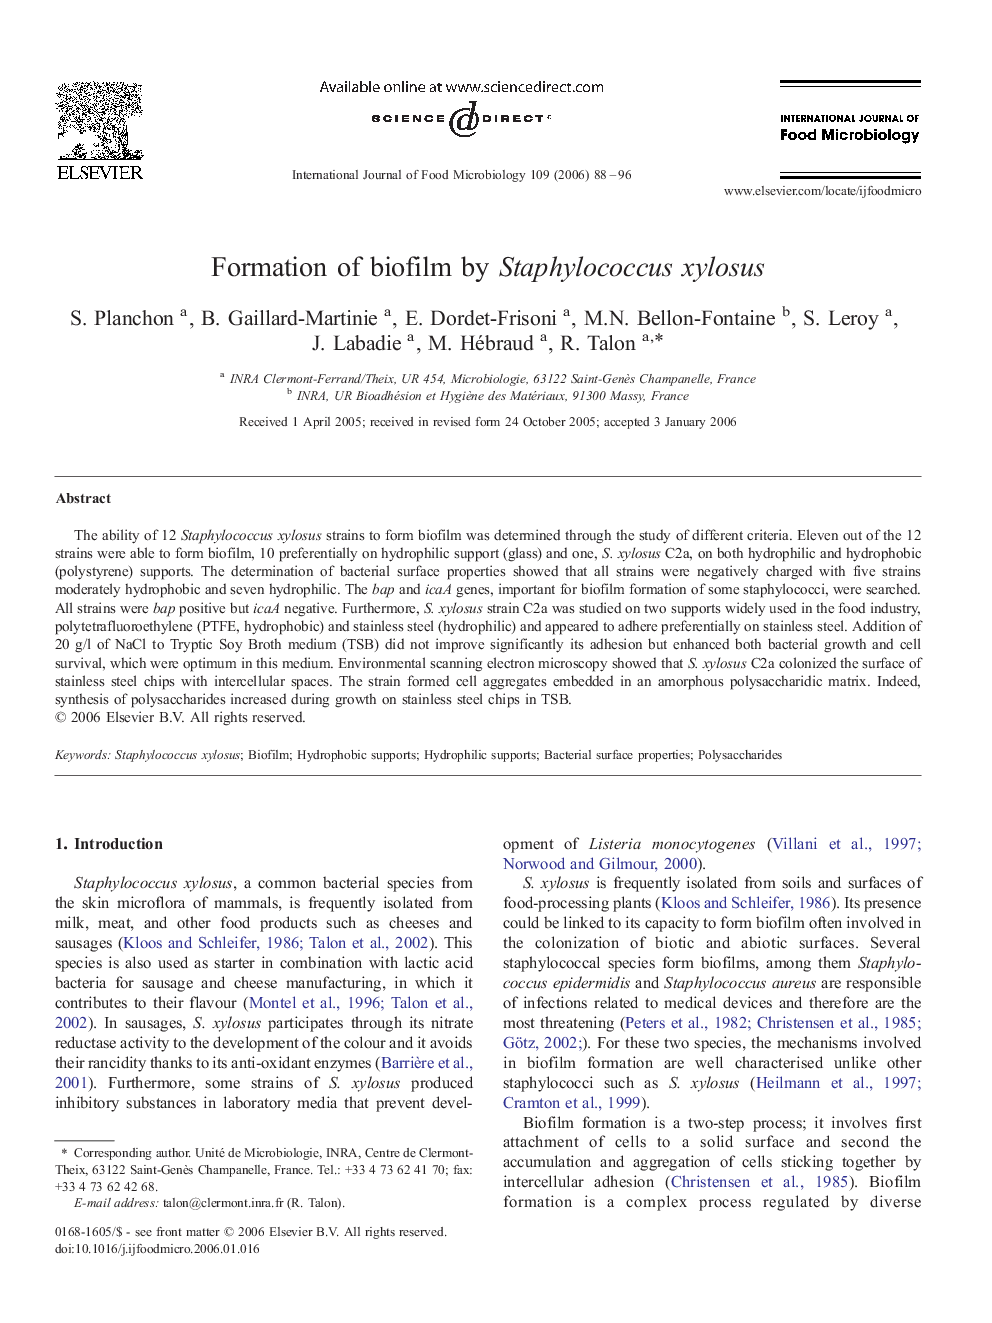 Formation of biofilm by Staphylococcus xylosus